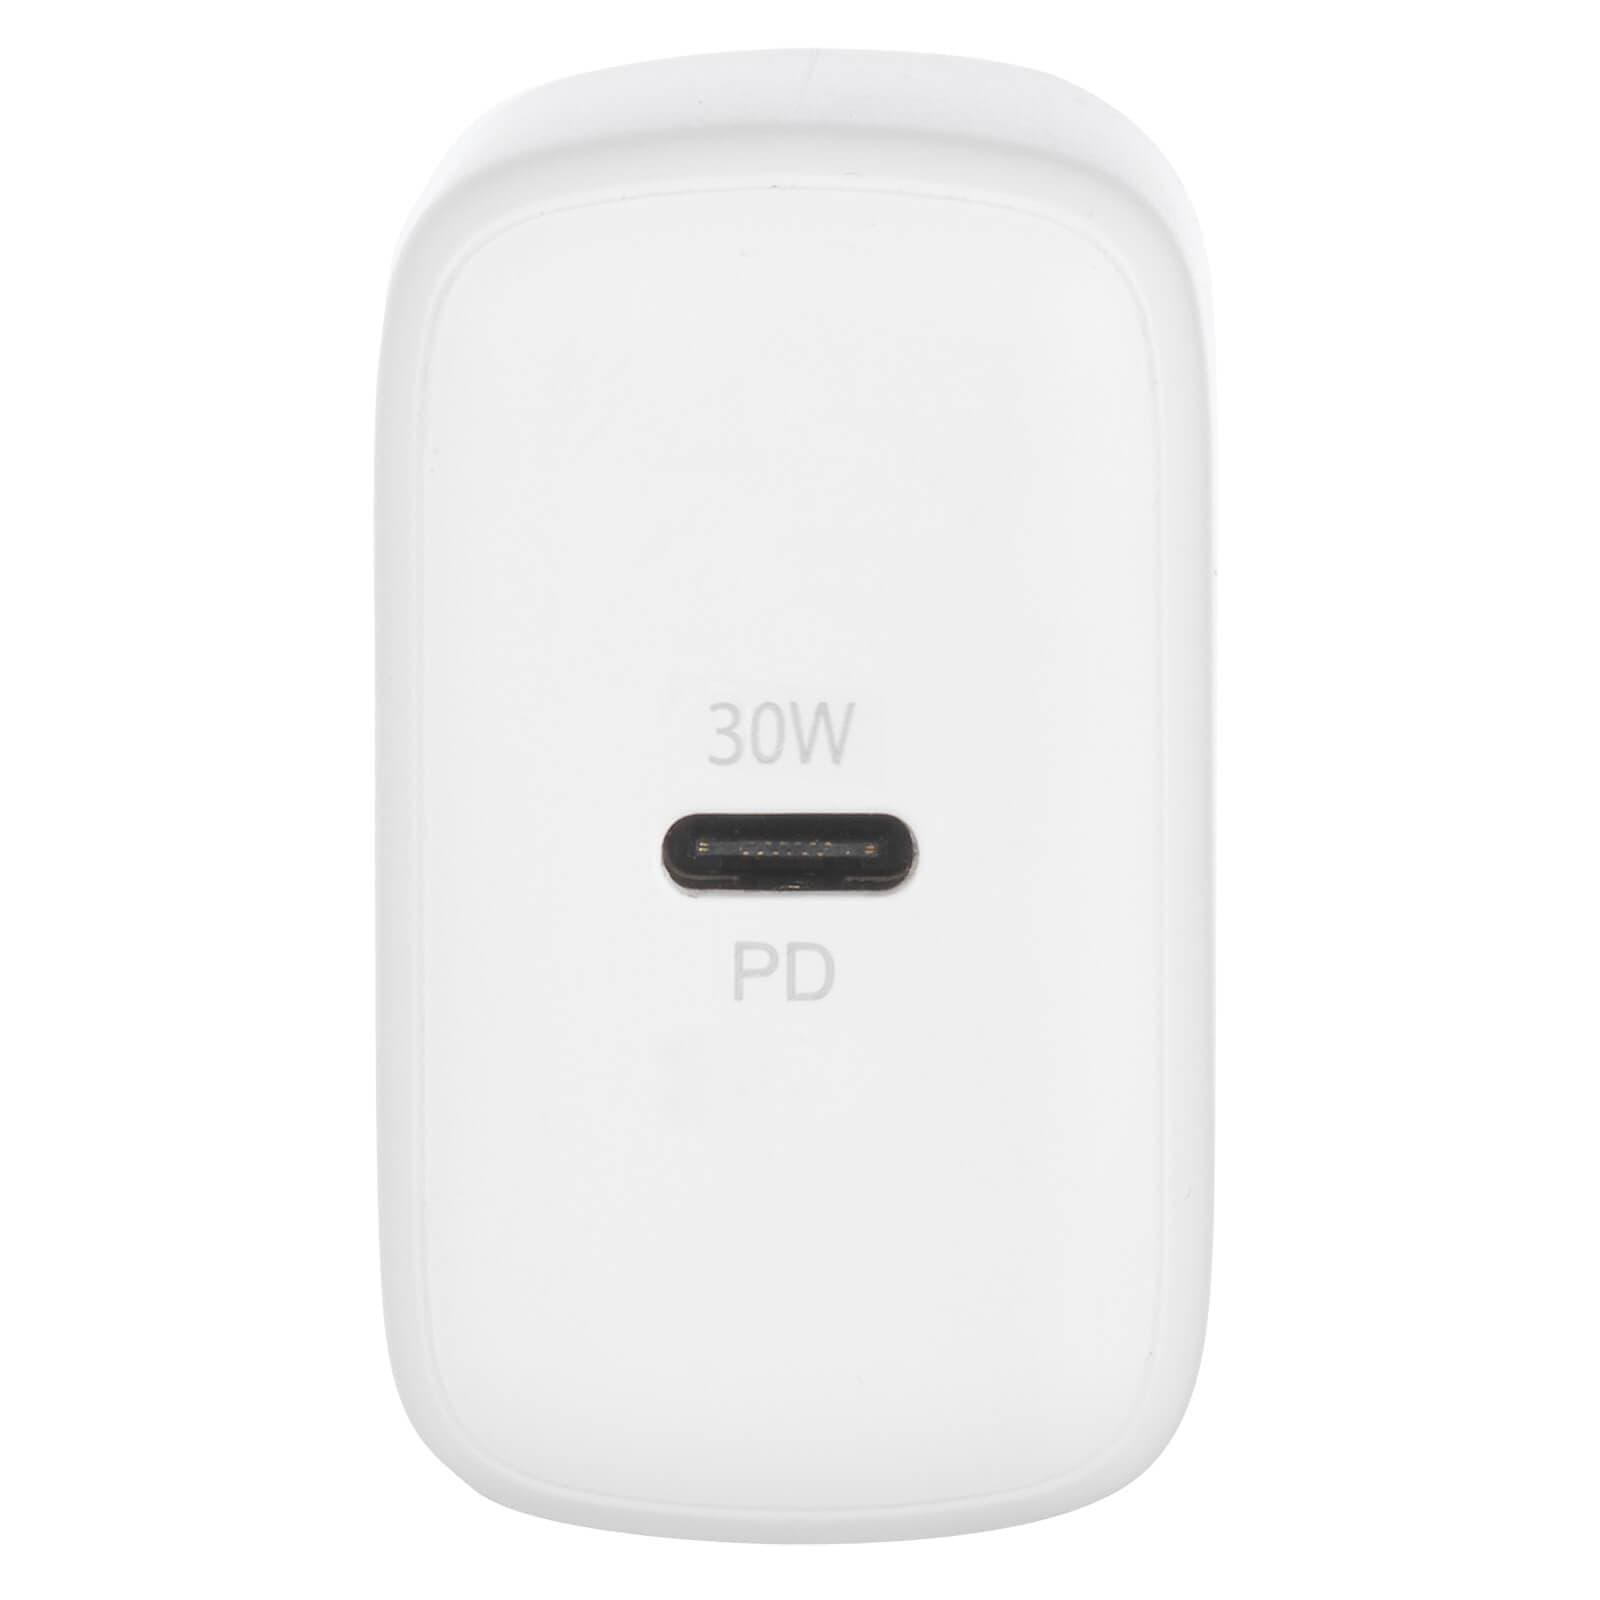 30W PD power adapter. color::White